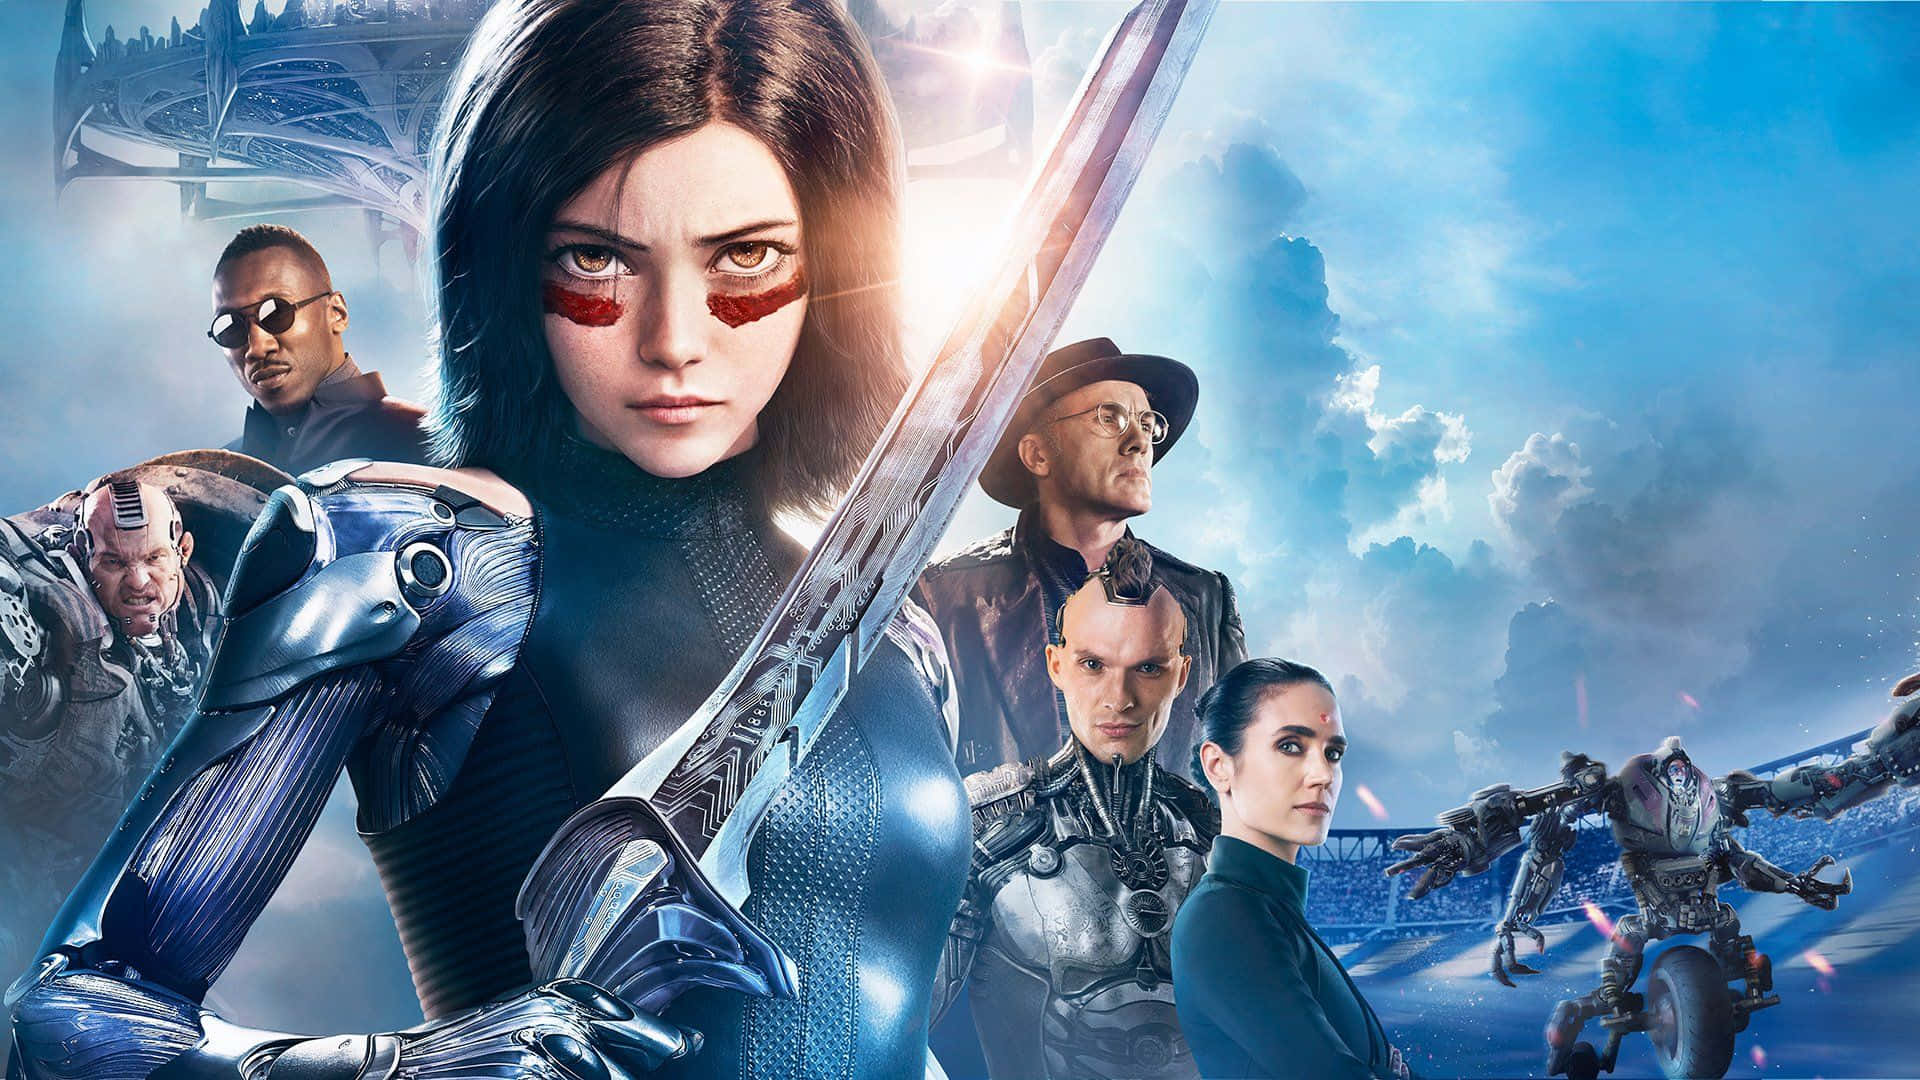 Alita Battle Angel takes on the universe with her sword and powerful cyborg body.